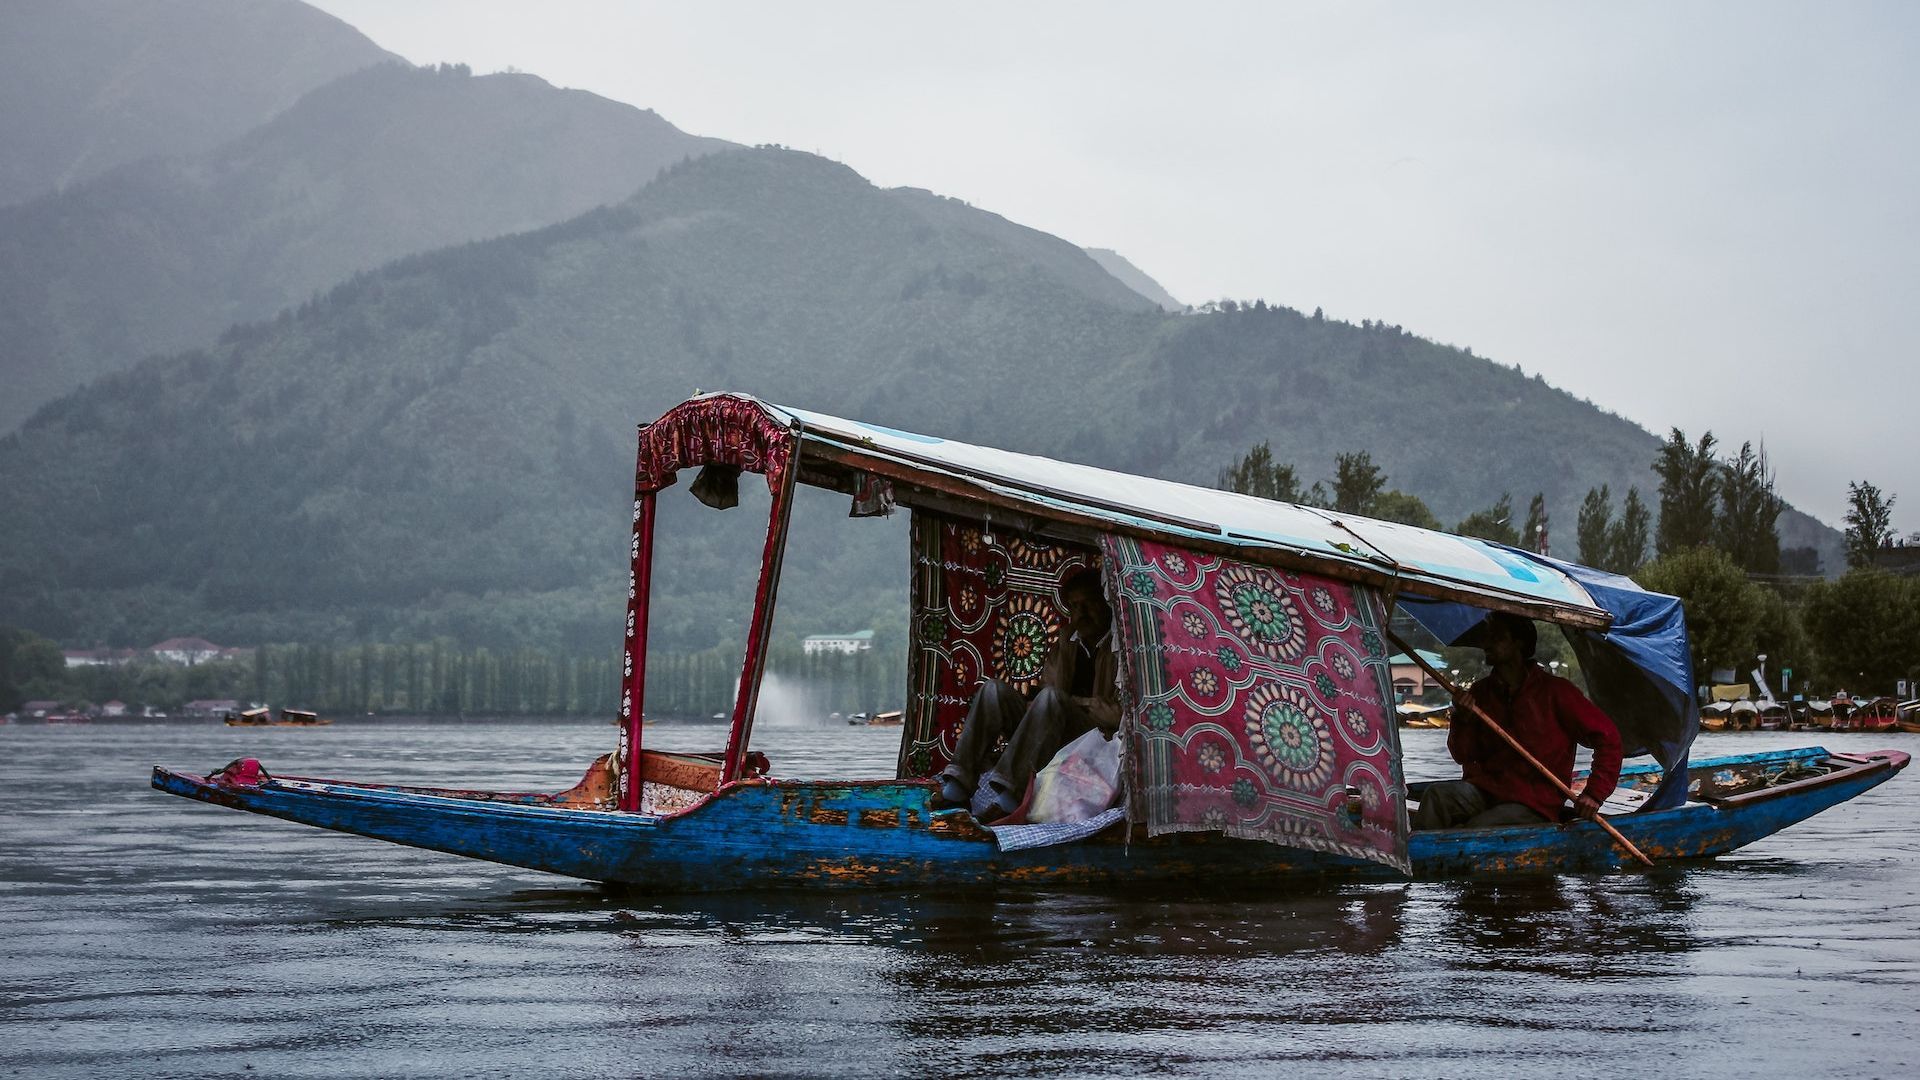 Dal lake, Kashmir | Pirie, Helen R. | V&A Explore The Collections